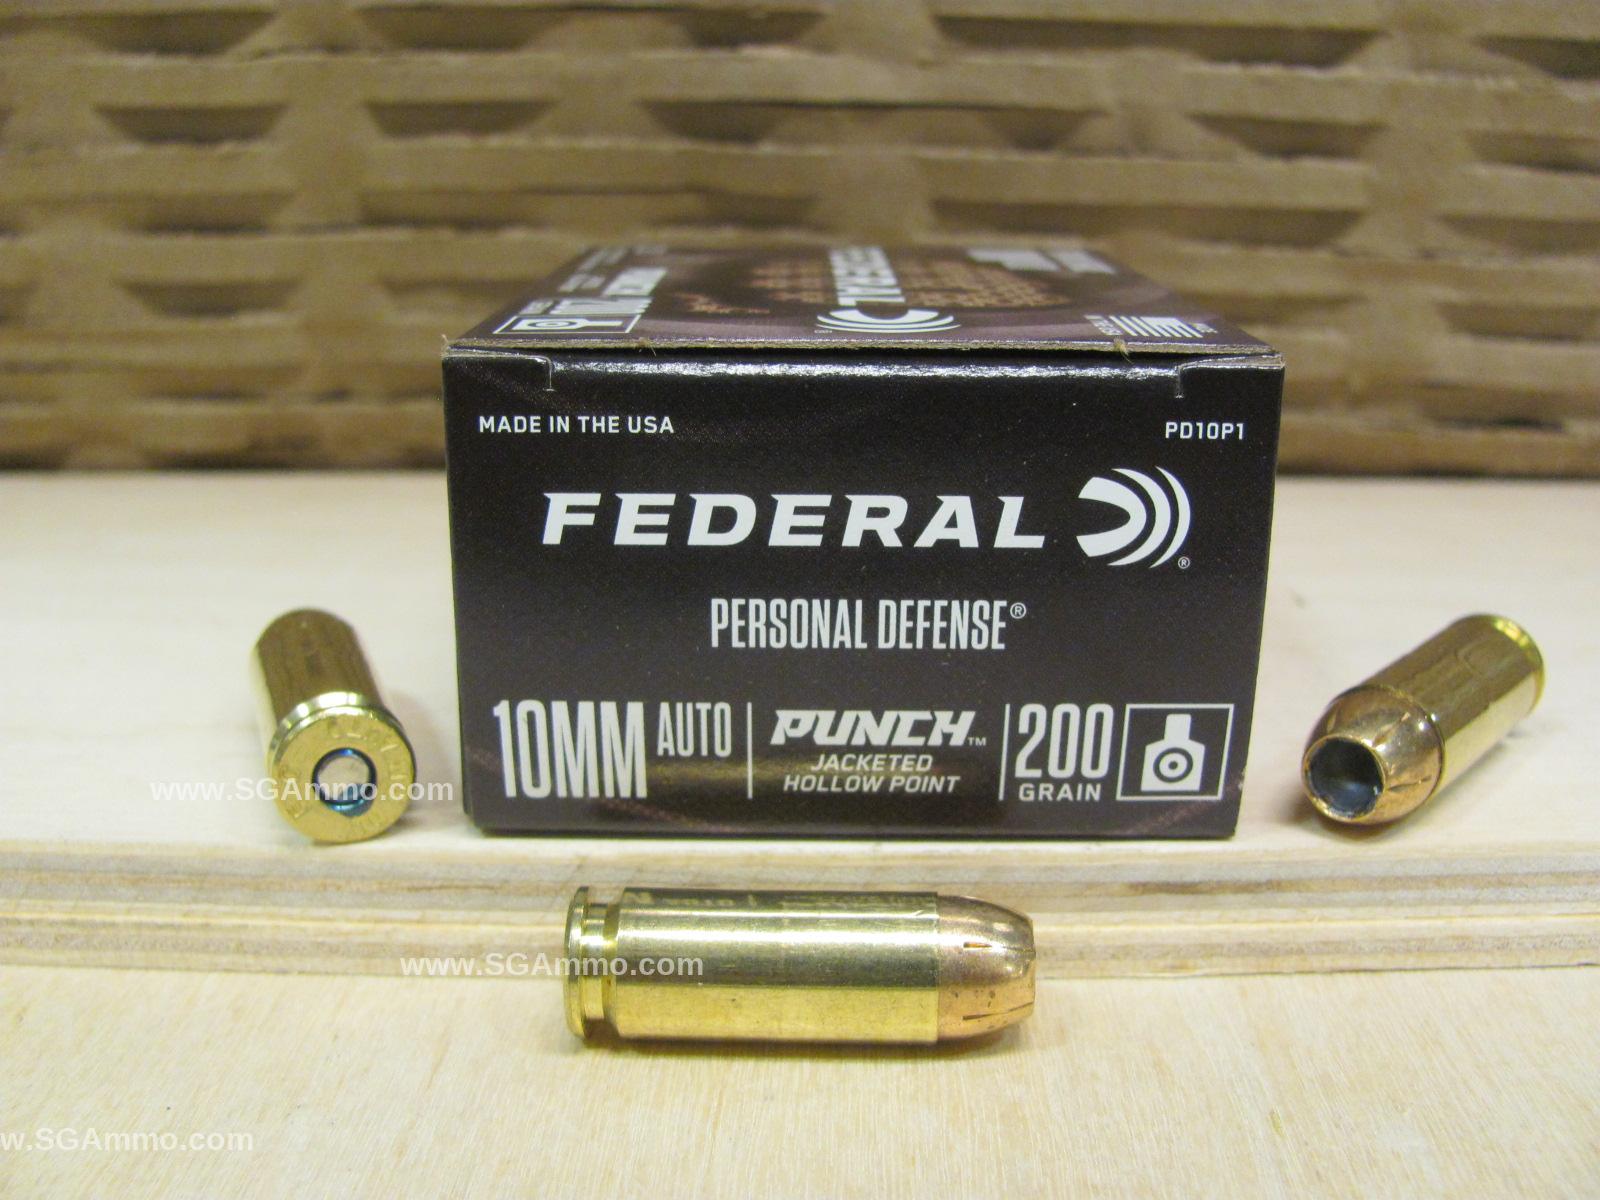 200 Round Case - 10mm Auto 200 Grain Jacketed Hollow Point Federal Punch Ammo - PD10P1